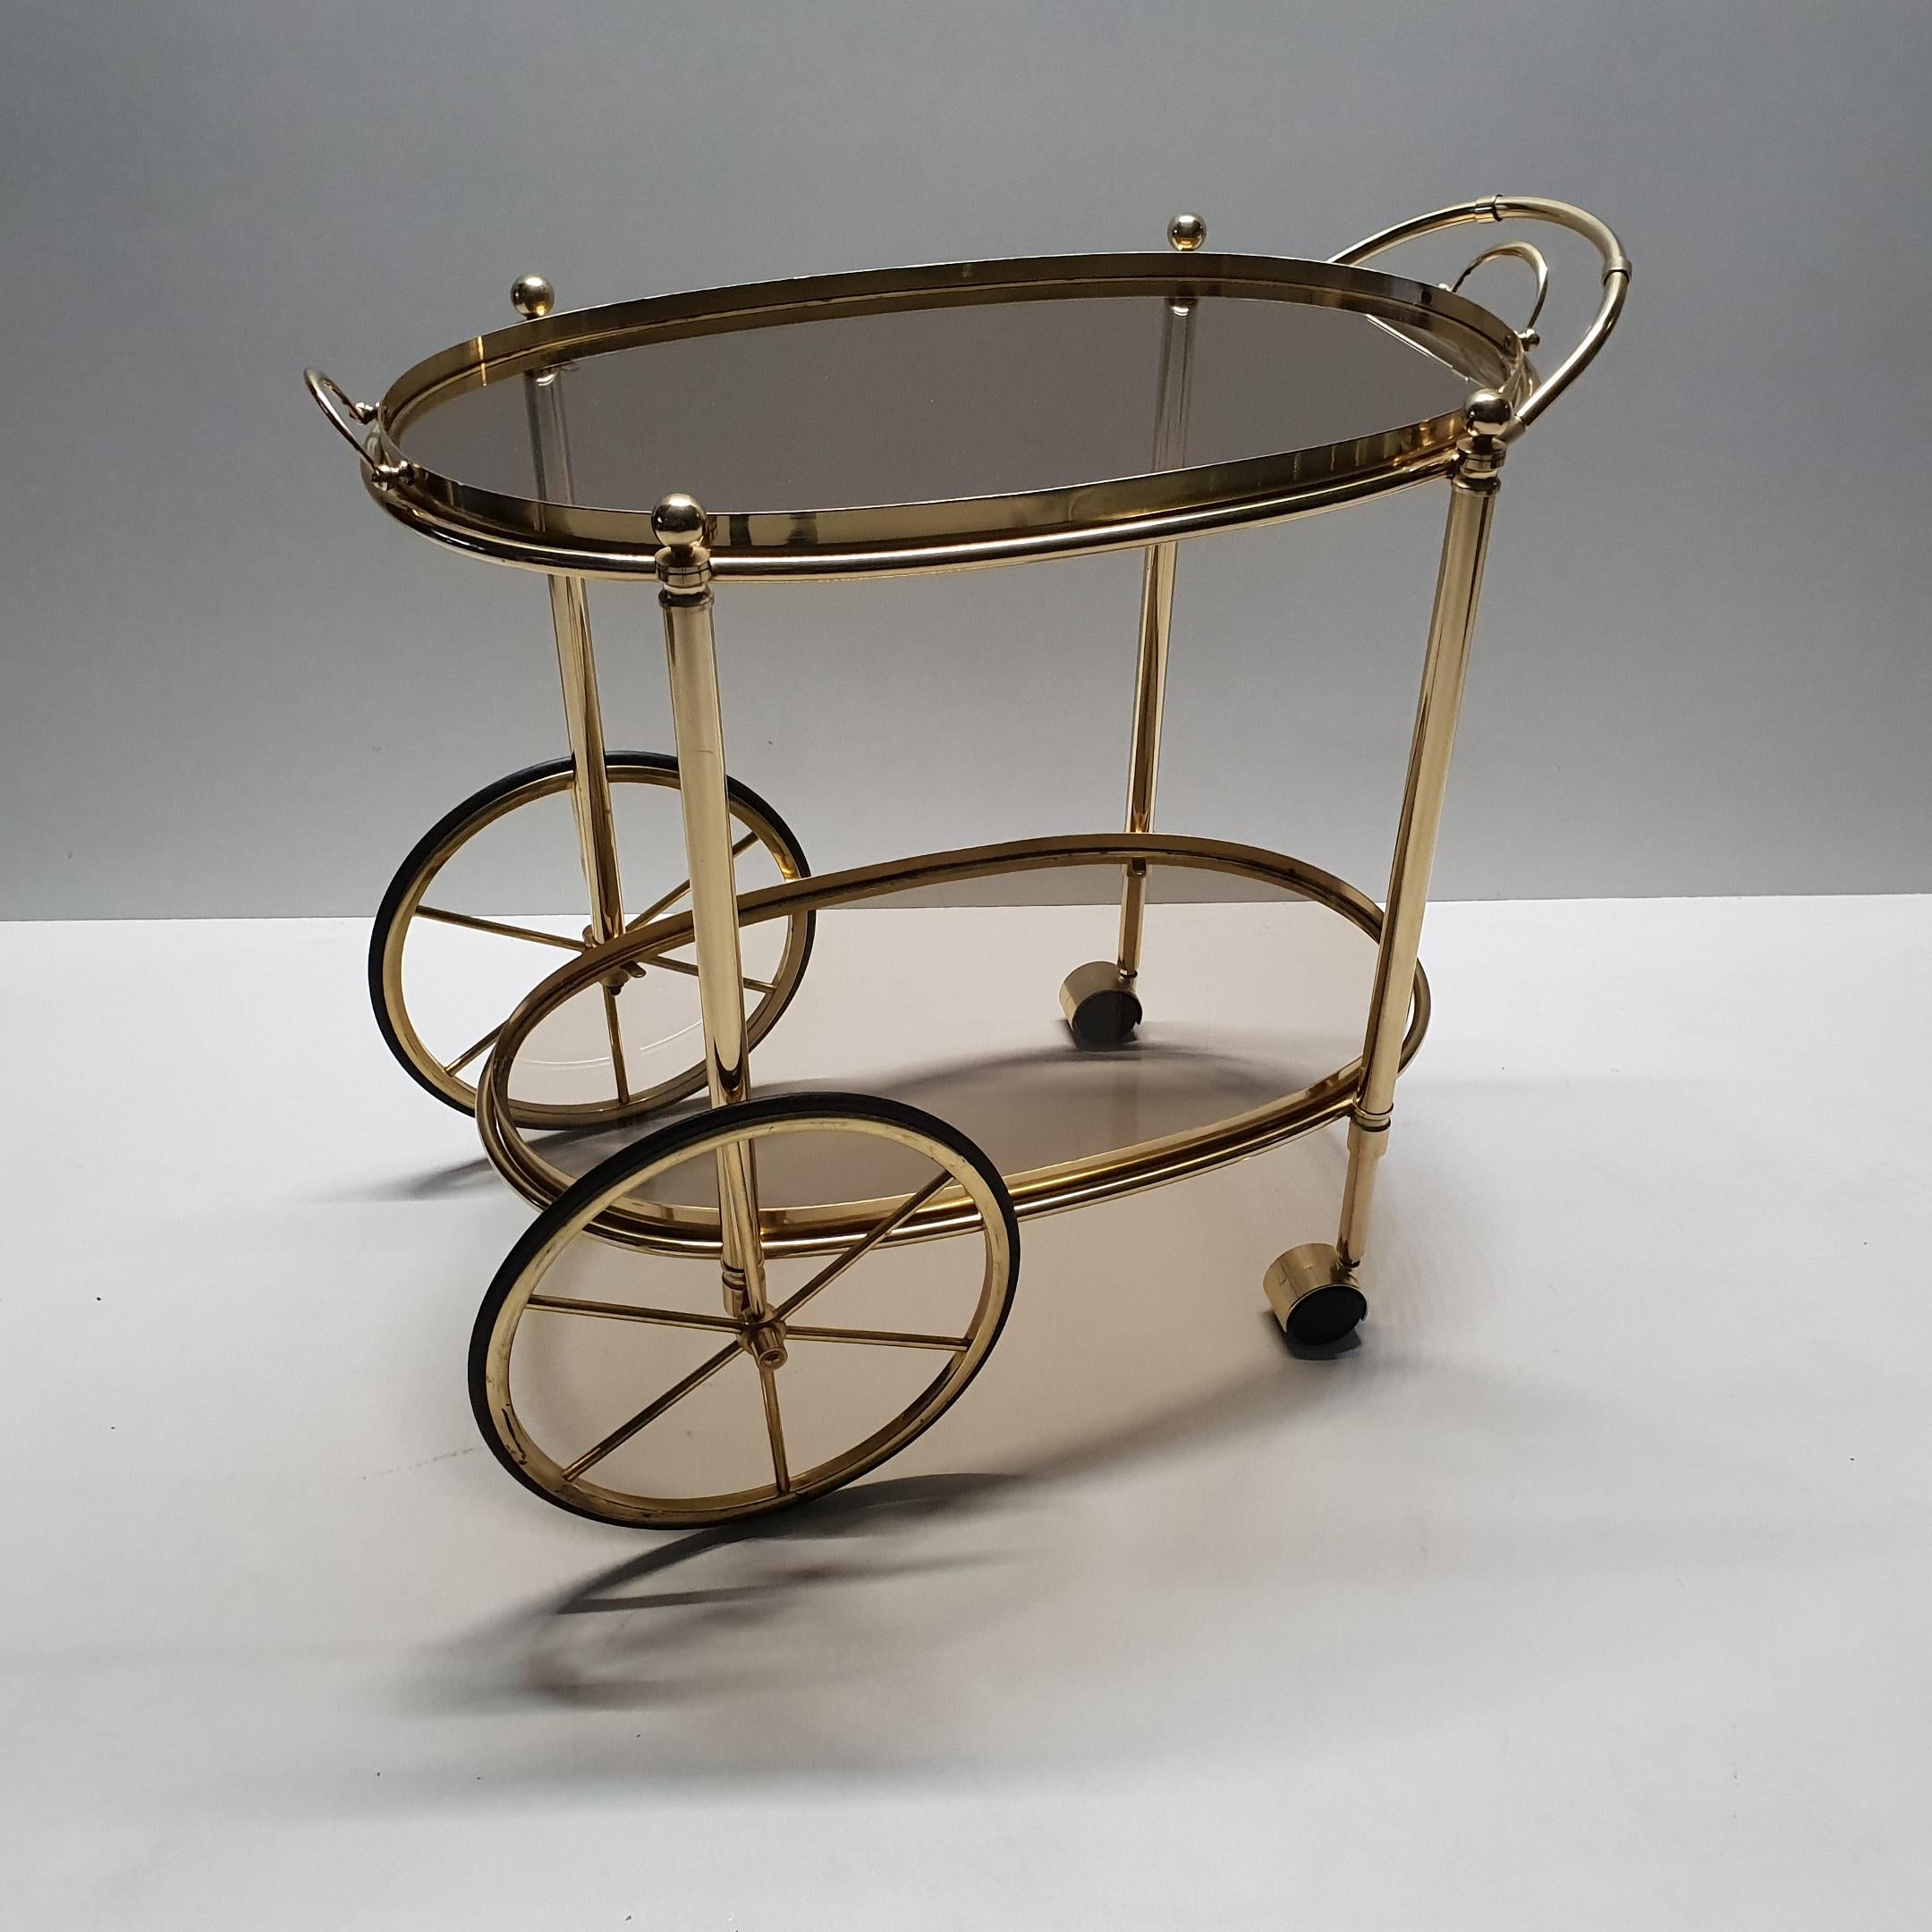 High Quality Italian Brass Trolley Bar Cart with Smoked Glass, 1980s For Sale 6